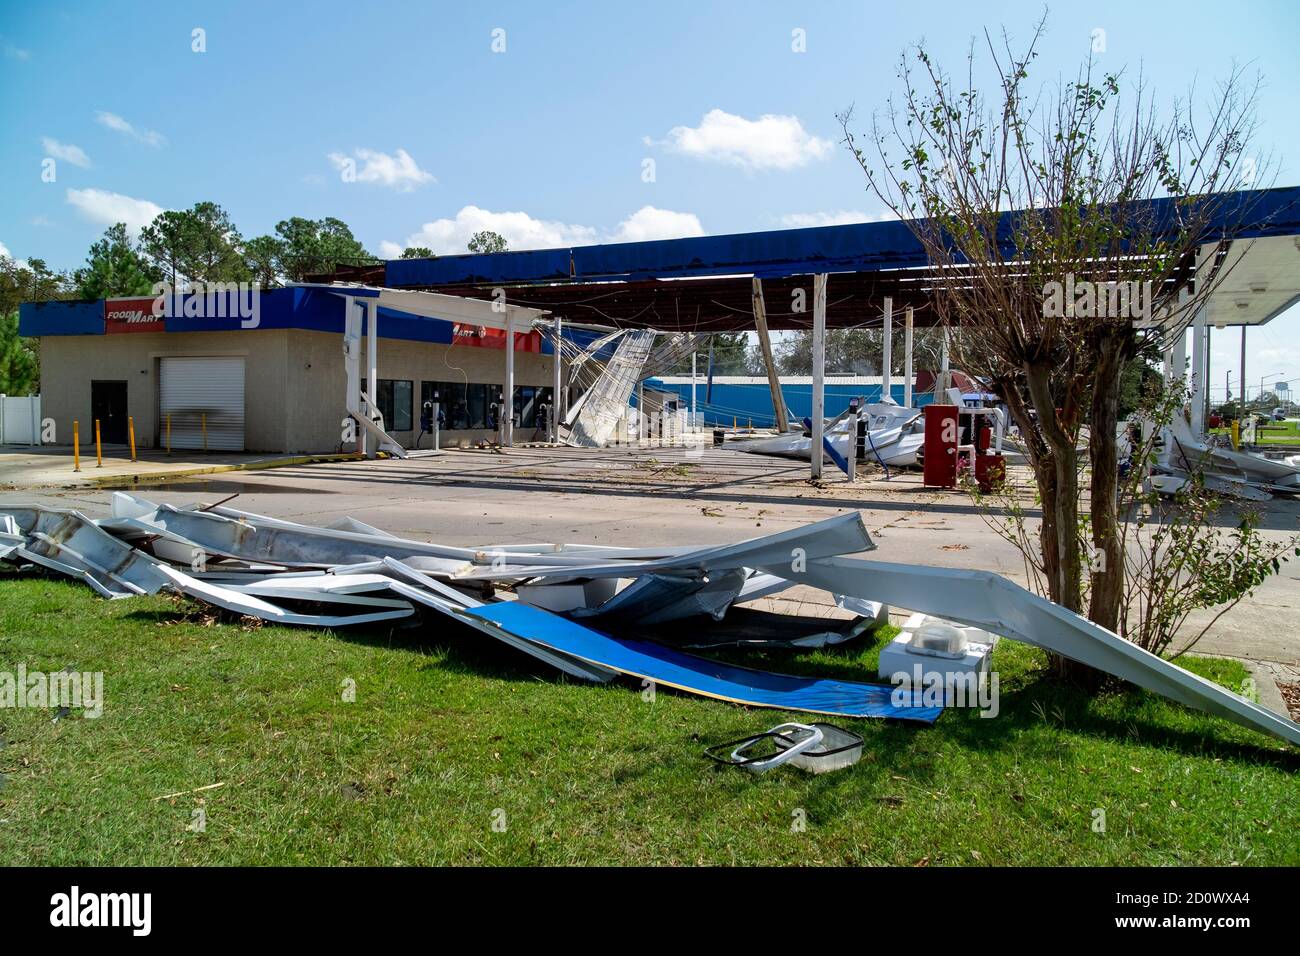 Destruction at a convenience store in Foley, Alabama caused by Hurricane Sally. Stock Photo